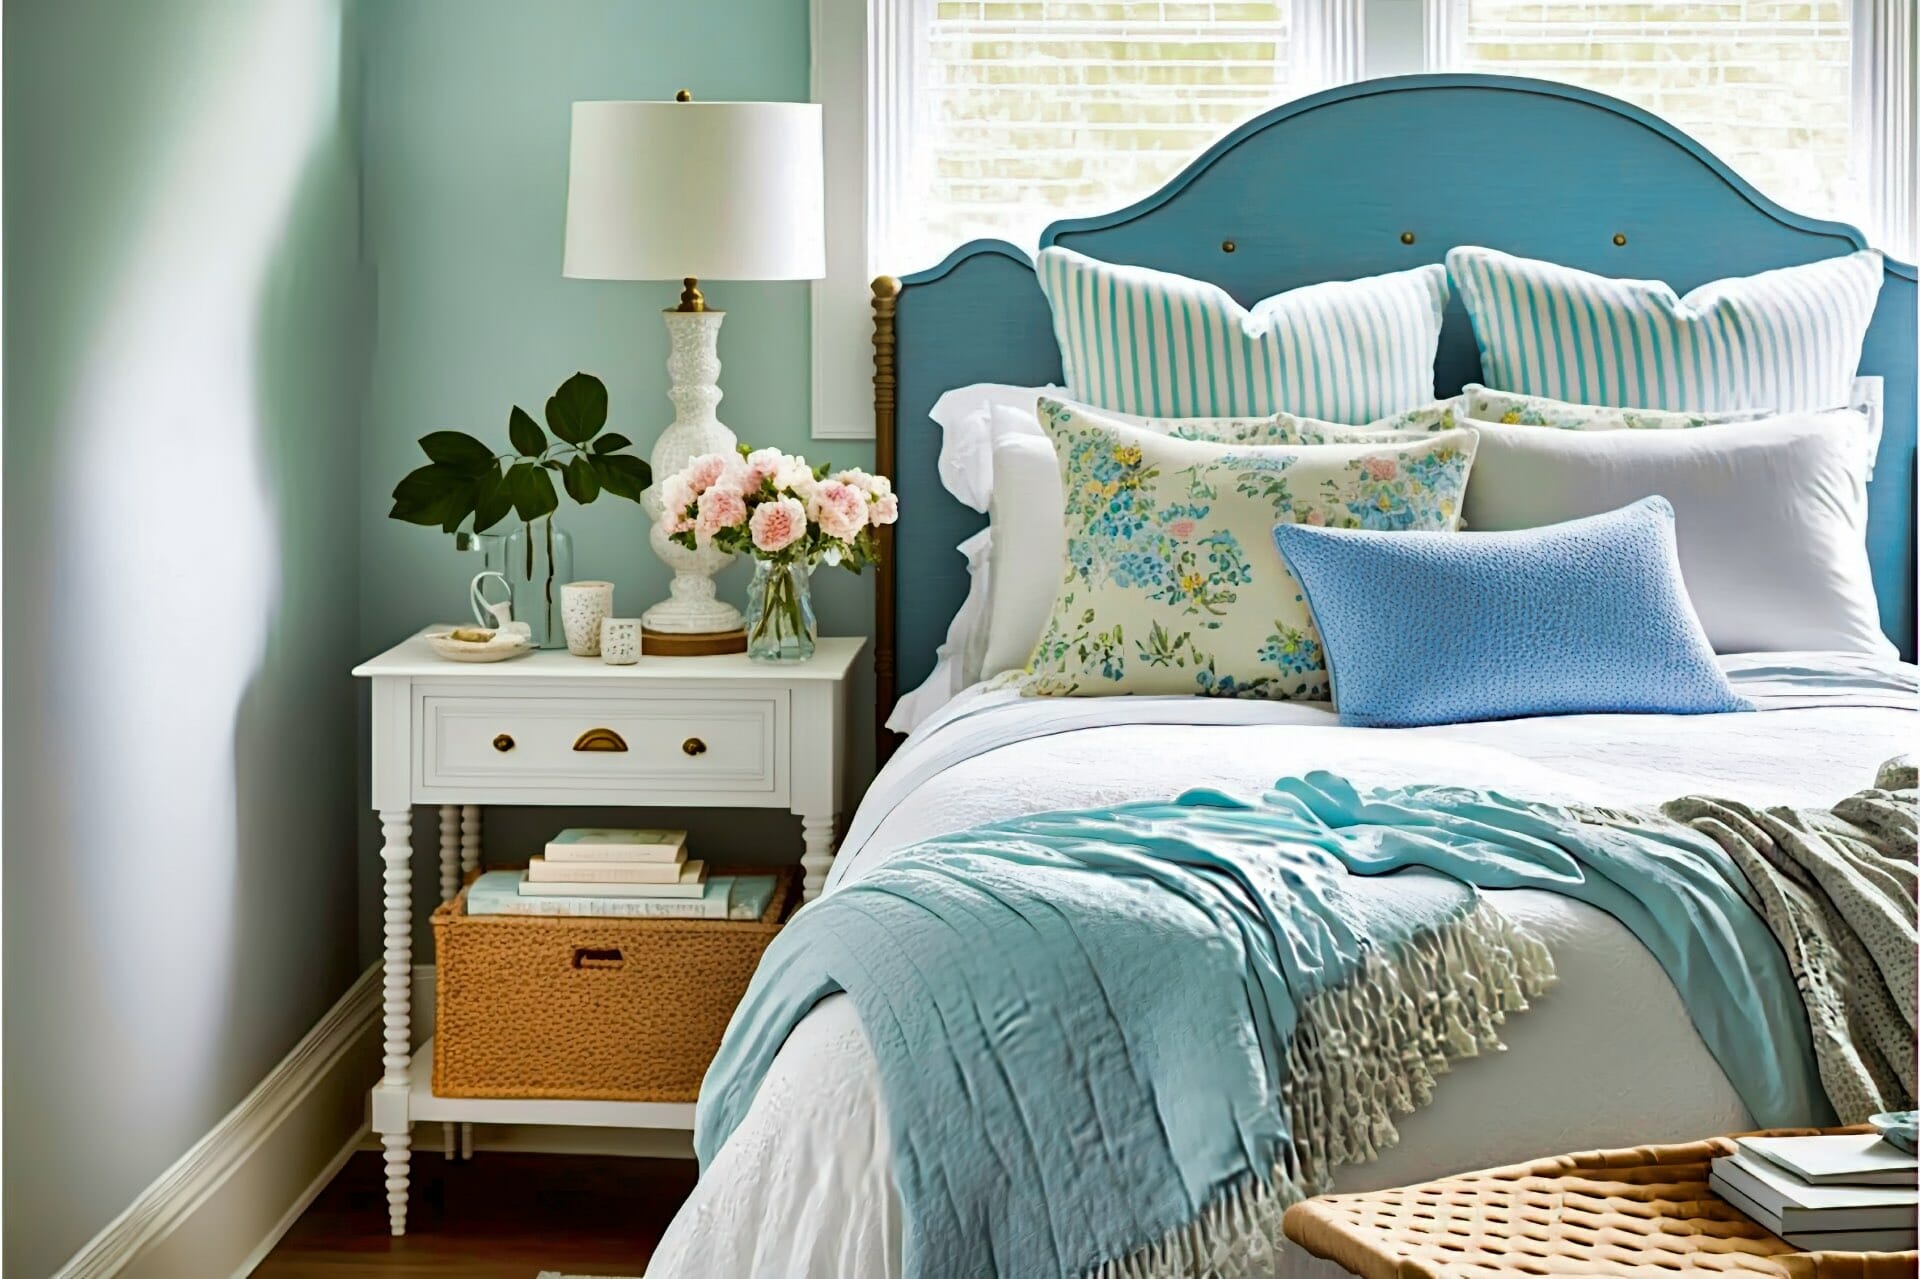 Cottage Style Bedroom With A Serene And Peaceful Feel, Thanks To The Light Blue Walls And Calming Decor. A Full Size Bed With A Simple White Headboard Is Dressed In A Crisp White Comforter, And A Collection Of Patterned Throw Pillows Add A Pop Of Color. A Matching White Nightstand With A Blue Lamp Sits Beside The Bed, And A Wicker Armchair With A Fluffy Cushion Provides A Cozy Seating Option. A Braided Rug In Shades Of Blue And White Anchors The Space, And A Collection Of Framed Beach Scenes Adds A Touch Of The Coast.